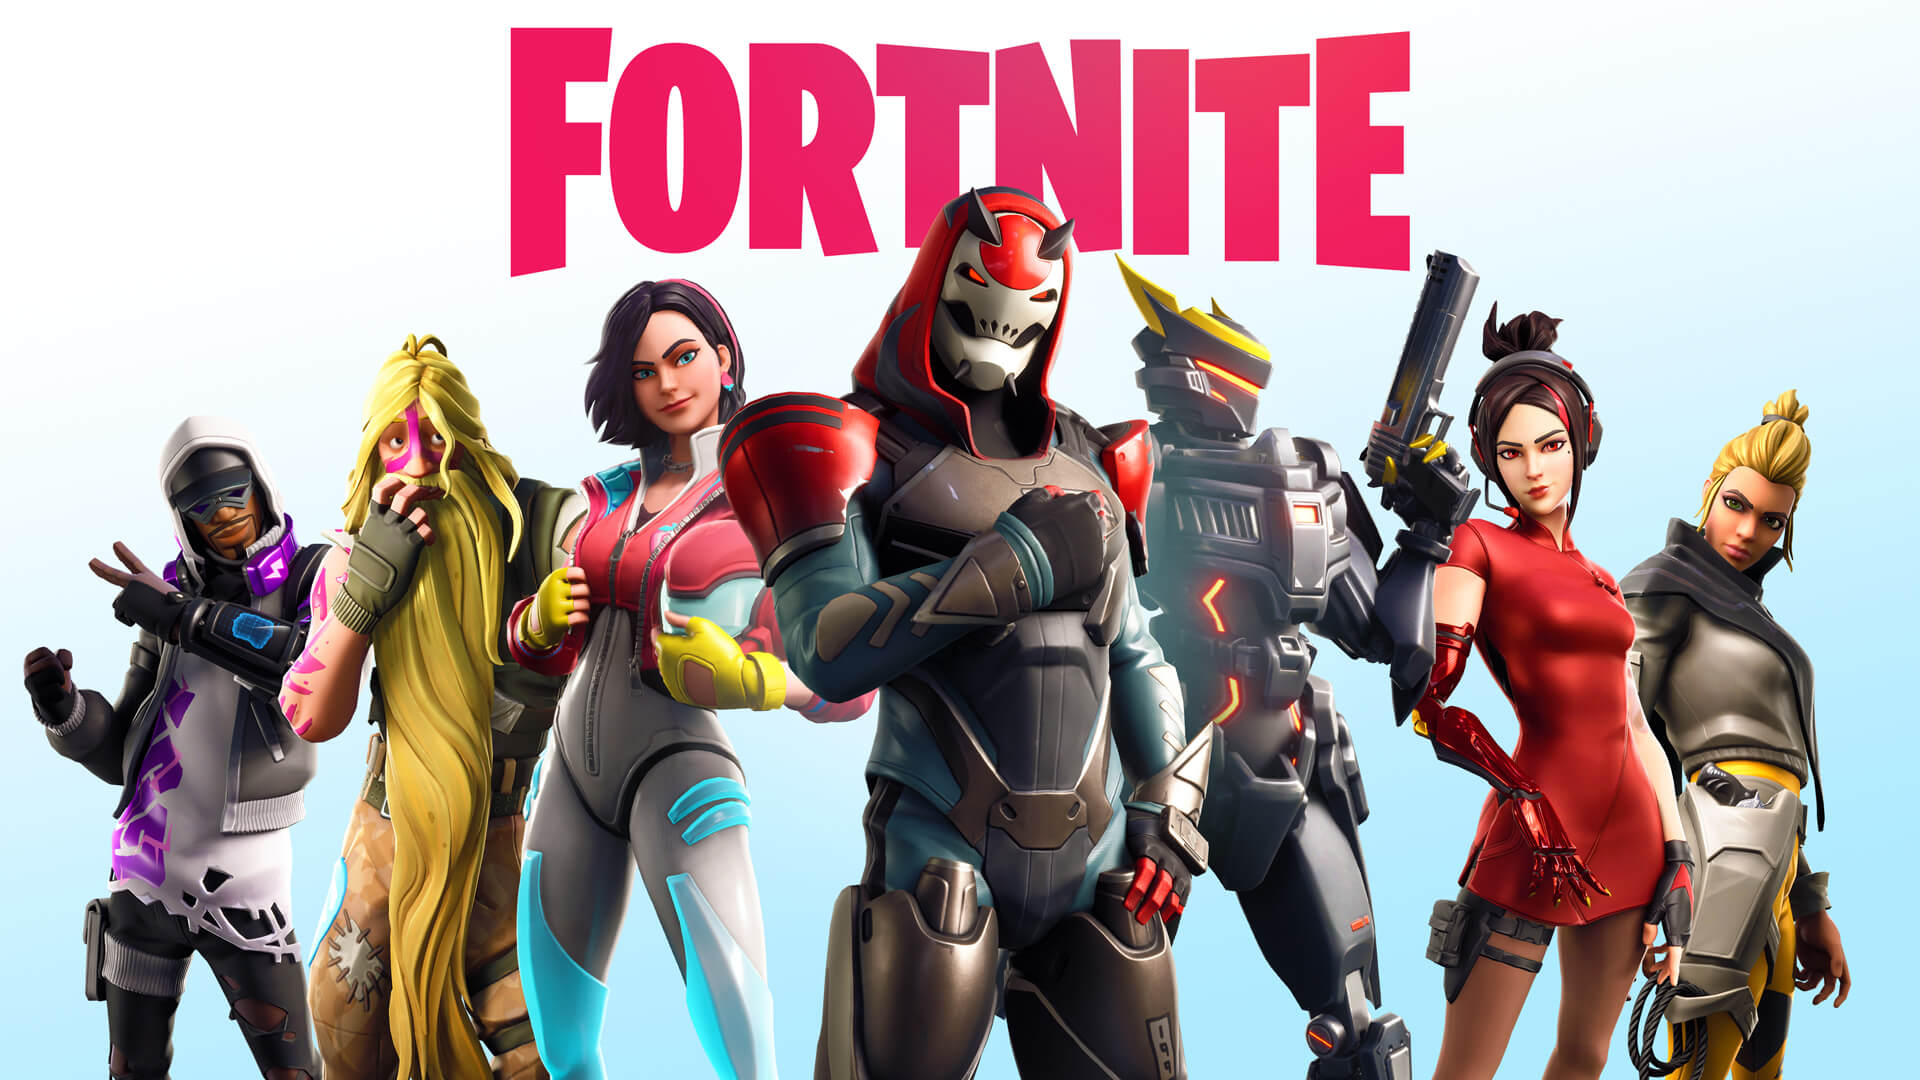 Fortnite Crack With License Key Free Full Download [2021]